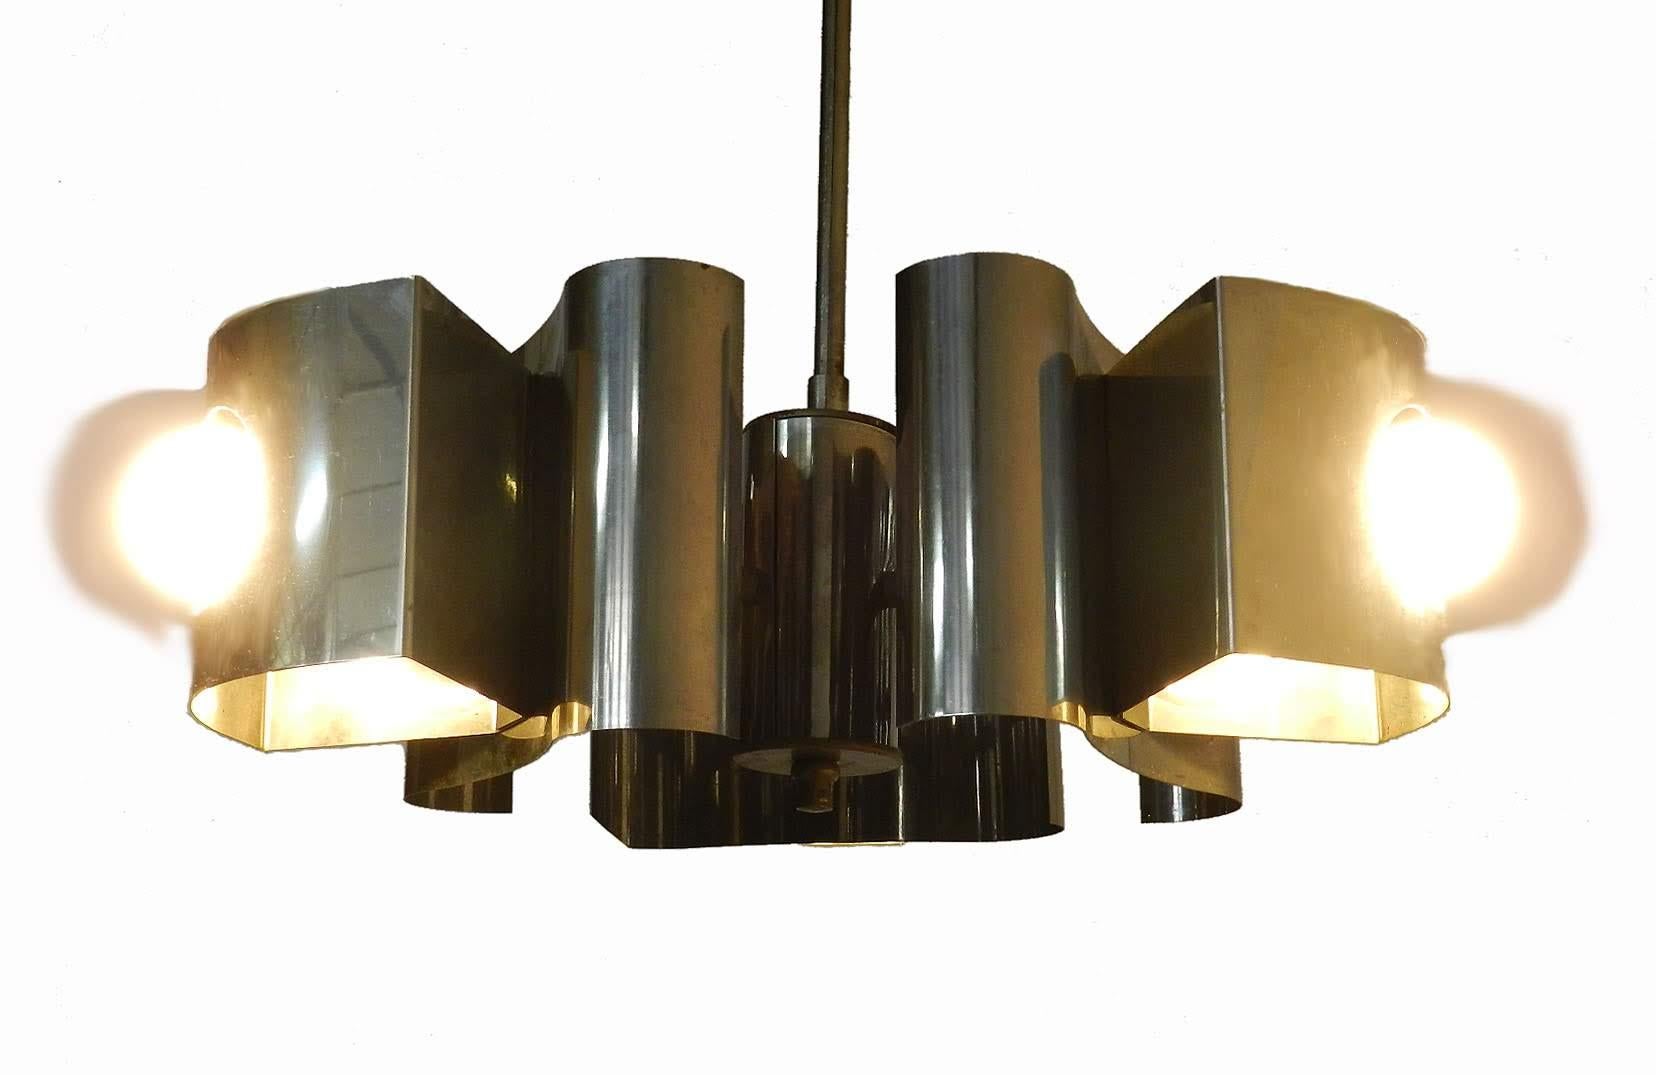 French three-light chandelier curved metal.
A sleek Space Age midcentury pendant light.
Very good condition. Wear consistent with age and use.
This can be rewired to USA or EU and UK standards please ask.